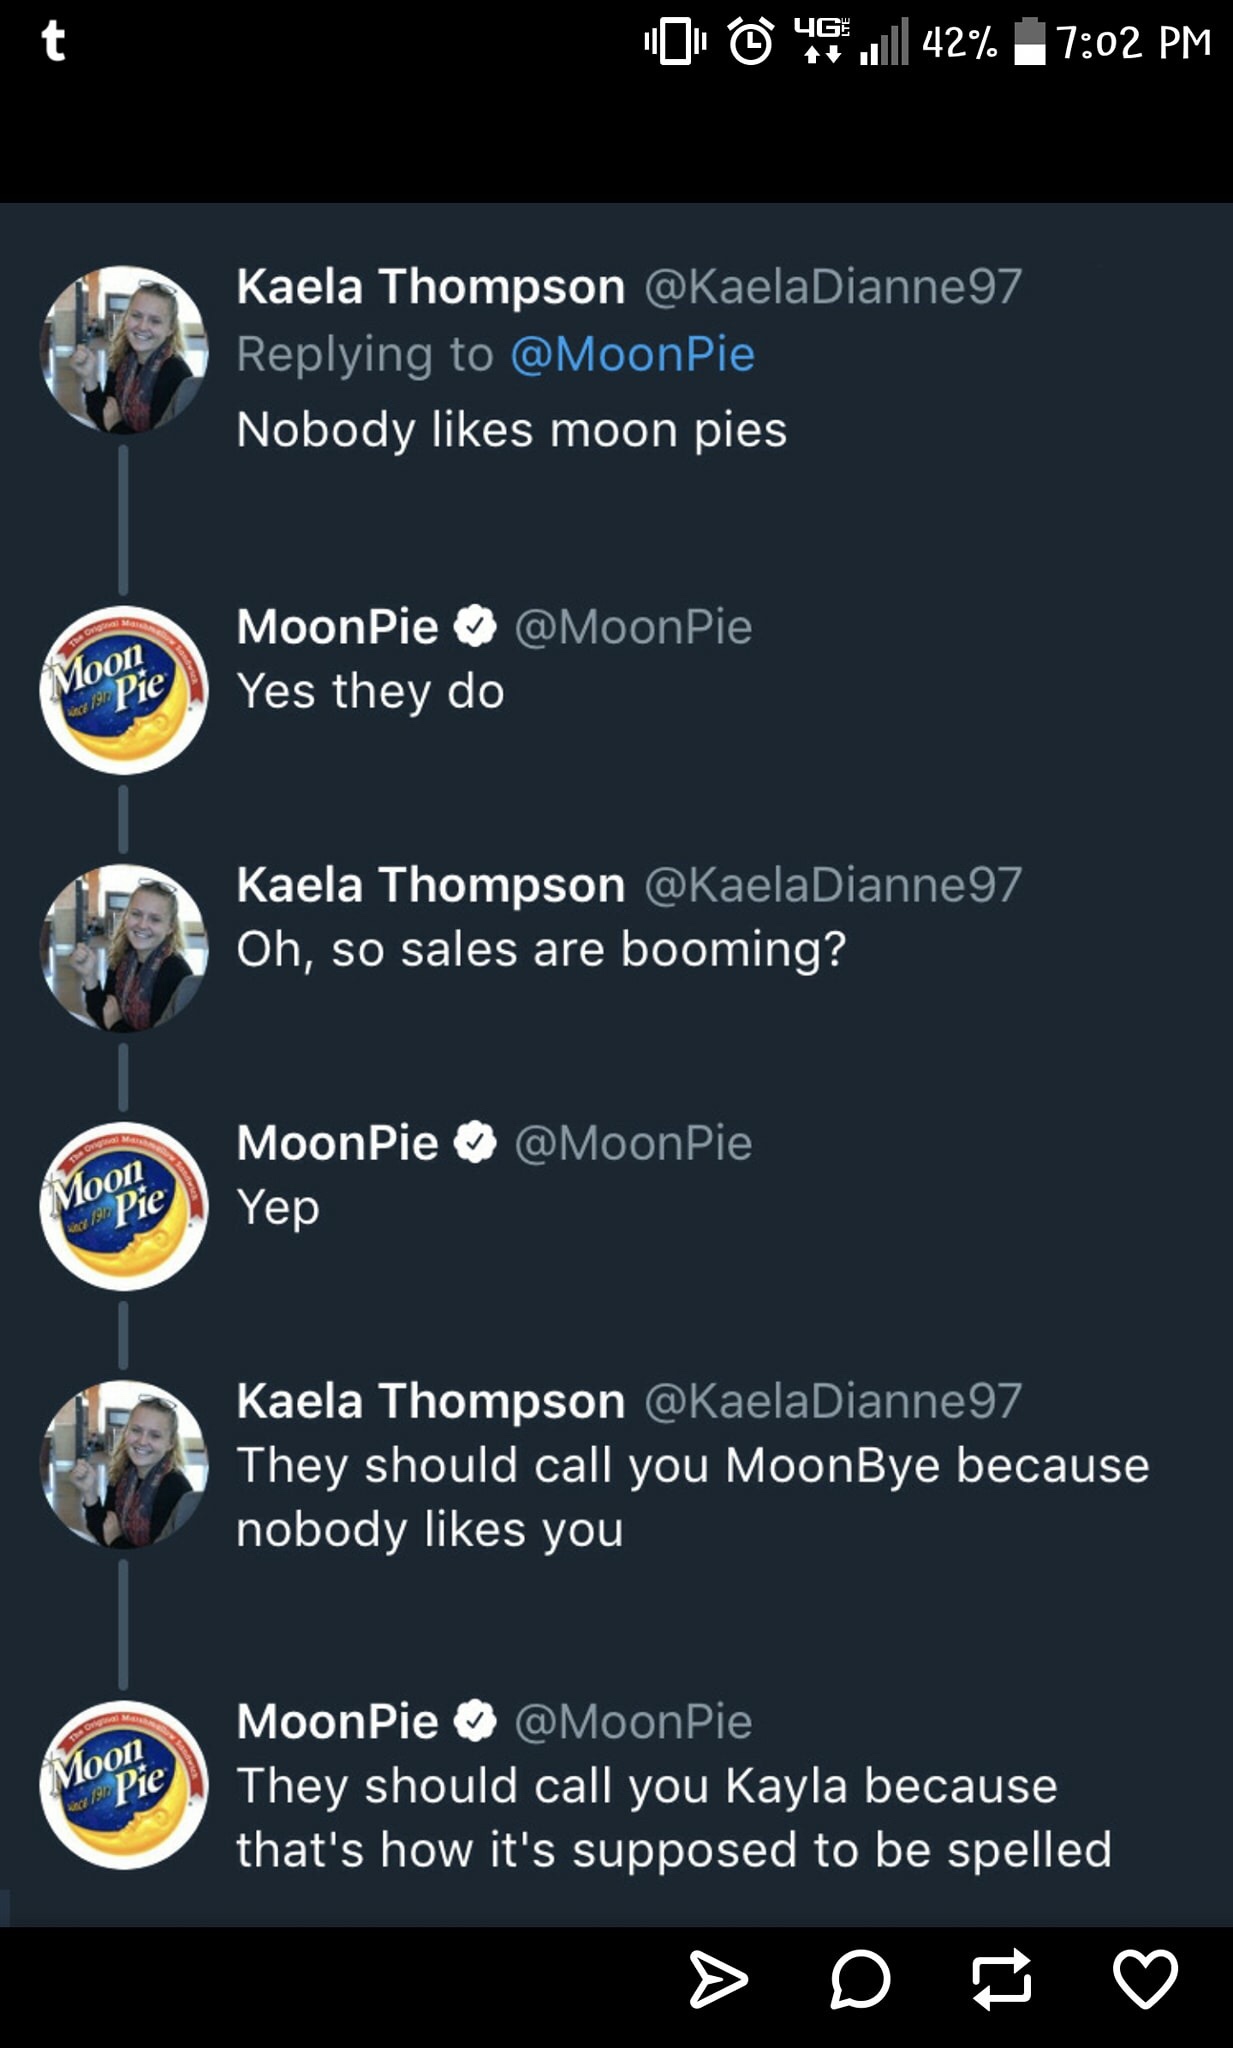 screenshot - O @ 46 .42% Kaela Thompson Pie Nobody moon pies Moon MoonPie Pie Yes they do since 10 Pie Kaela Thompson Oh, so sales are booming? Moon Pie Pie Moonrie Mo Moon since 19. P ie Yep Kaela Thompson They should call you MoonBye because nobody you 